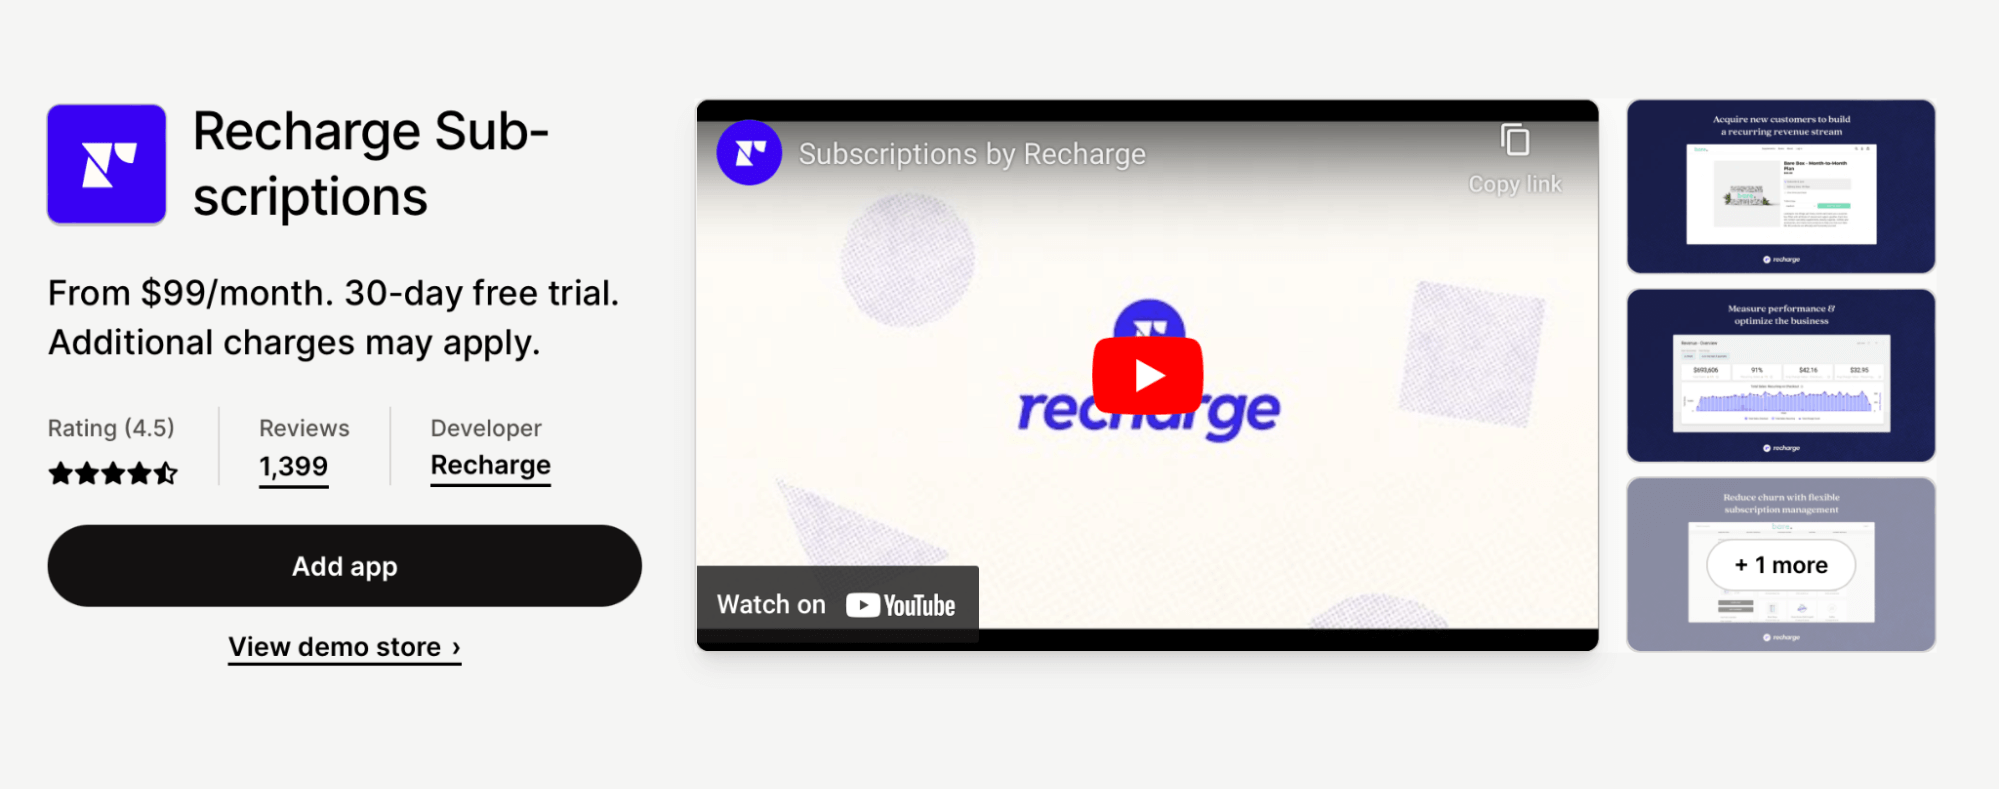 Recharge Subscriptions page on Shopify